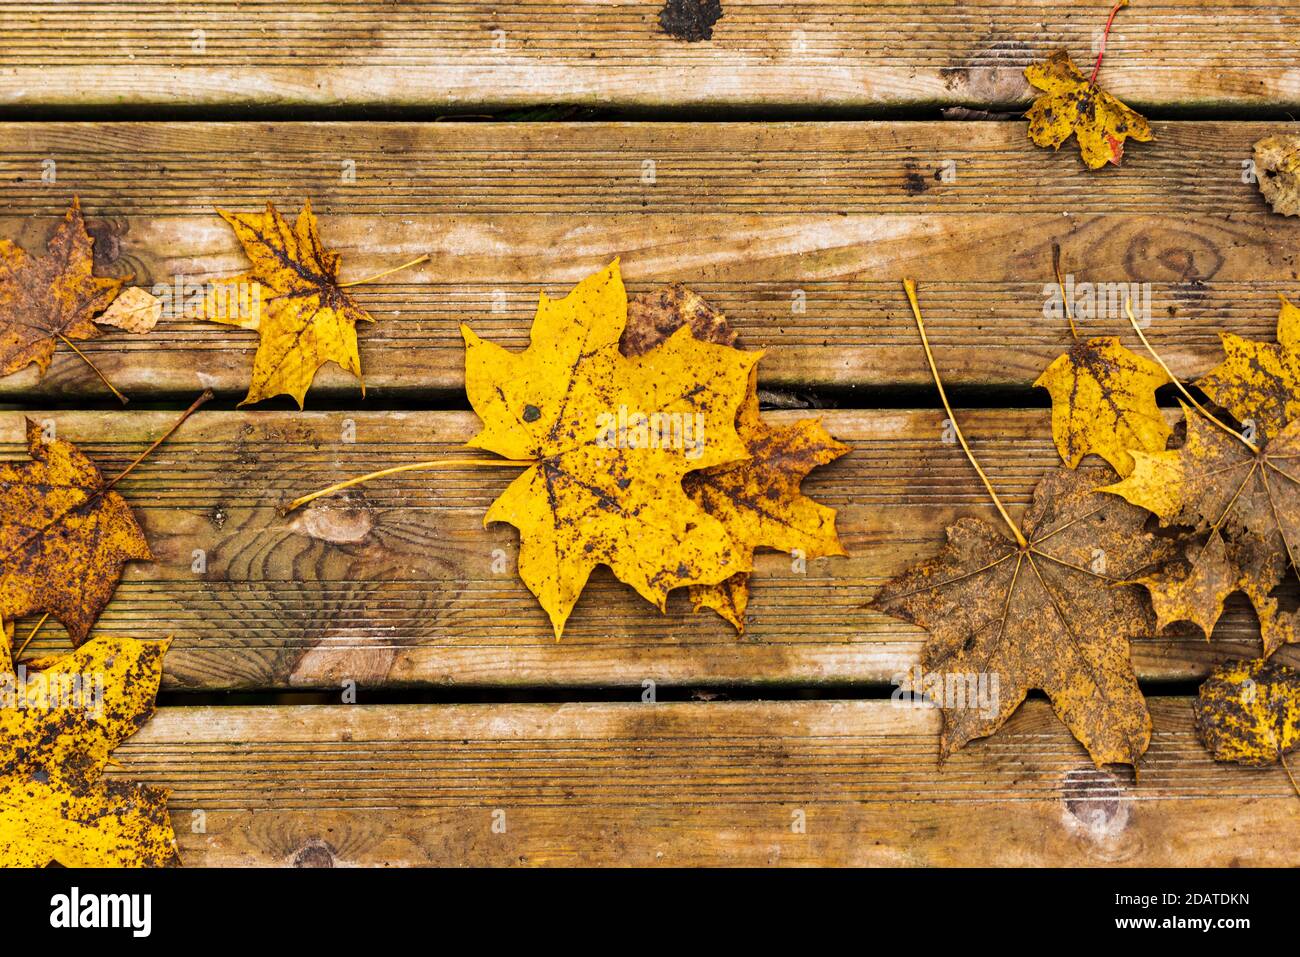 fallen leaves on wooden boards more interesting and brighter than each other, both yellow and orange and even brown Stock Photo